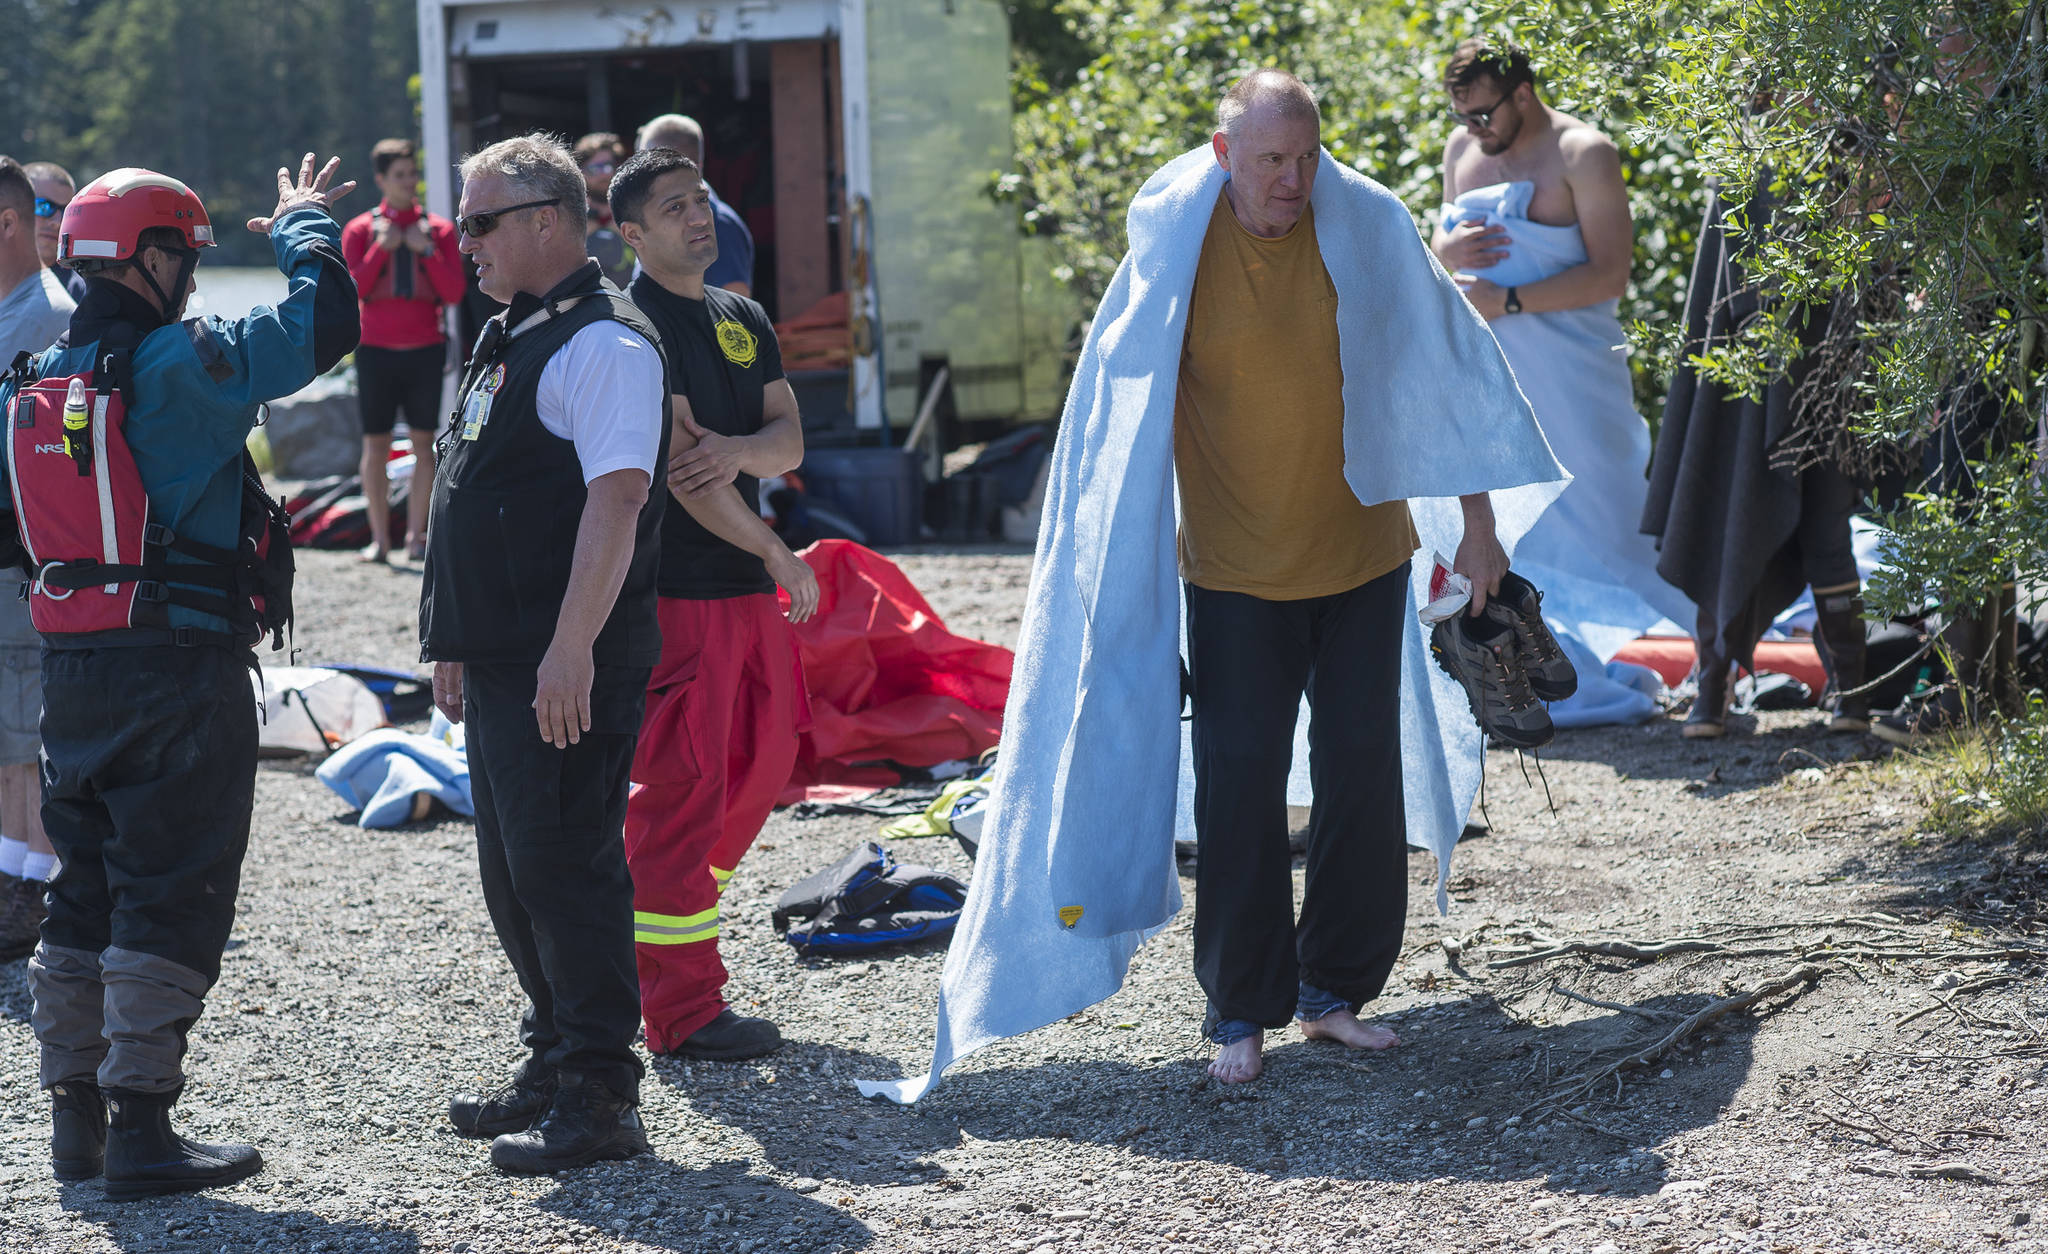 Capital City Fire/Rescue personnel care for victims who overturned their canoe during a guided trip on Mendenhall Lake on Friday, July 20, 2018. (Michael Penn | Juneau Empire)